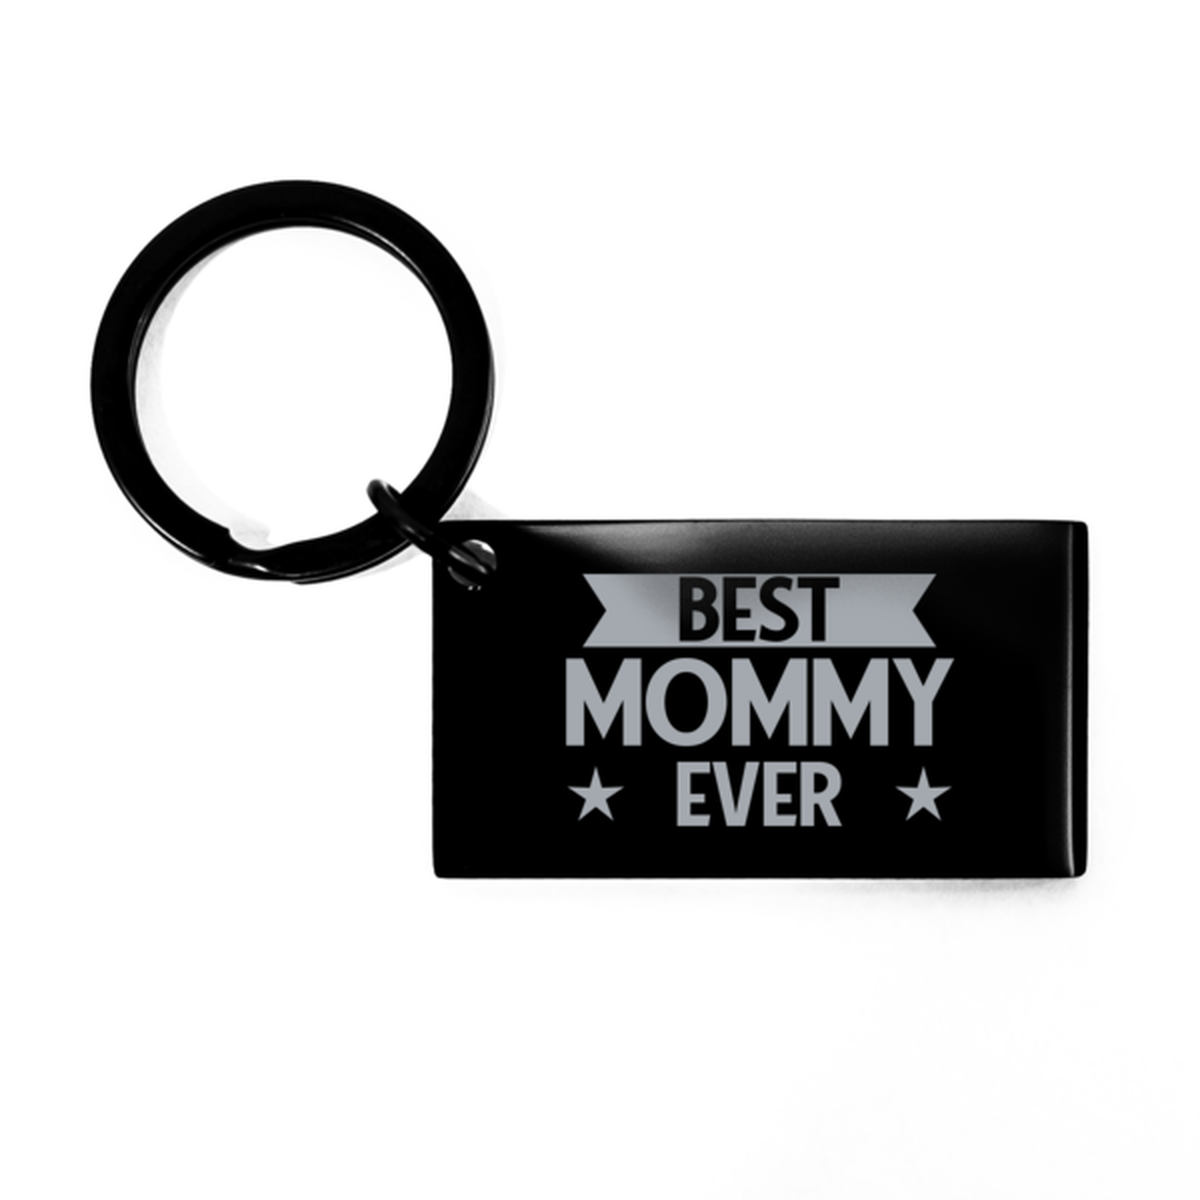 Best Mommy Ever Mommy Gifts, Funny Black Keychain For Mommy, Birthday Engraved Keyring Presents For Women